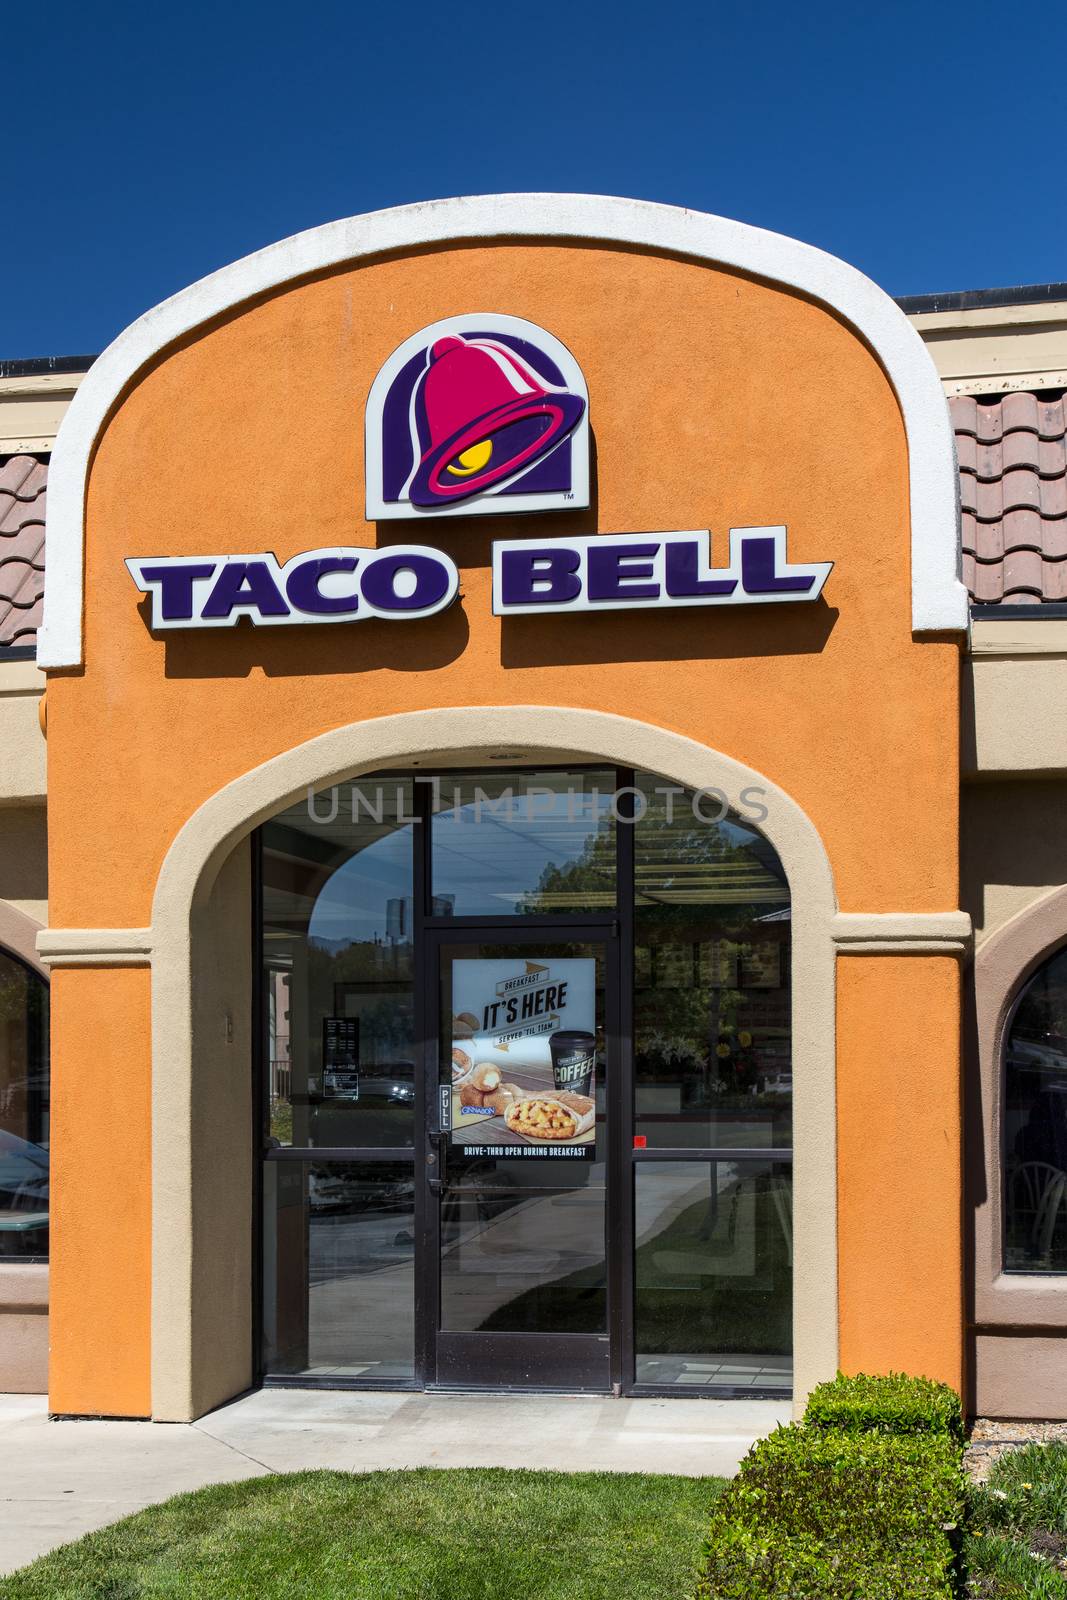 MORGAN HILL, CA/USA - MAY 11, 2014: Taco Bell Restaurant exterior. Taco Bell is an American chain of fast-food restaurants and serve a variety of Tex-Mex foods.